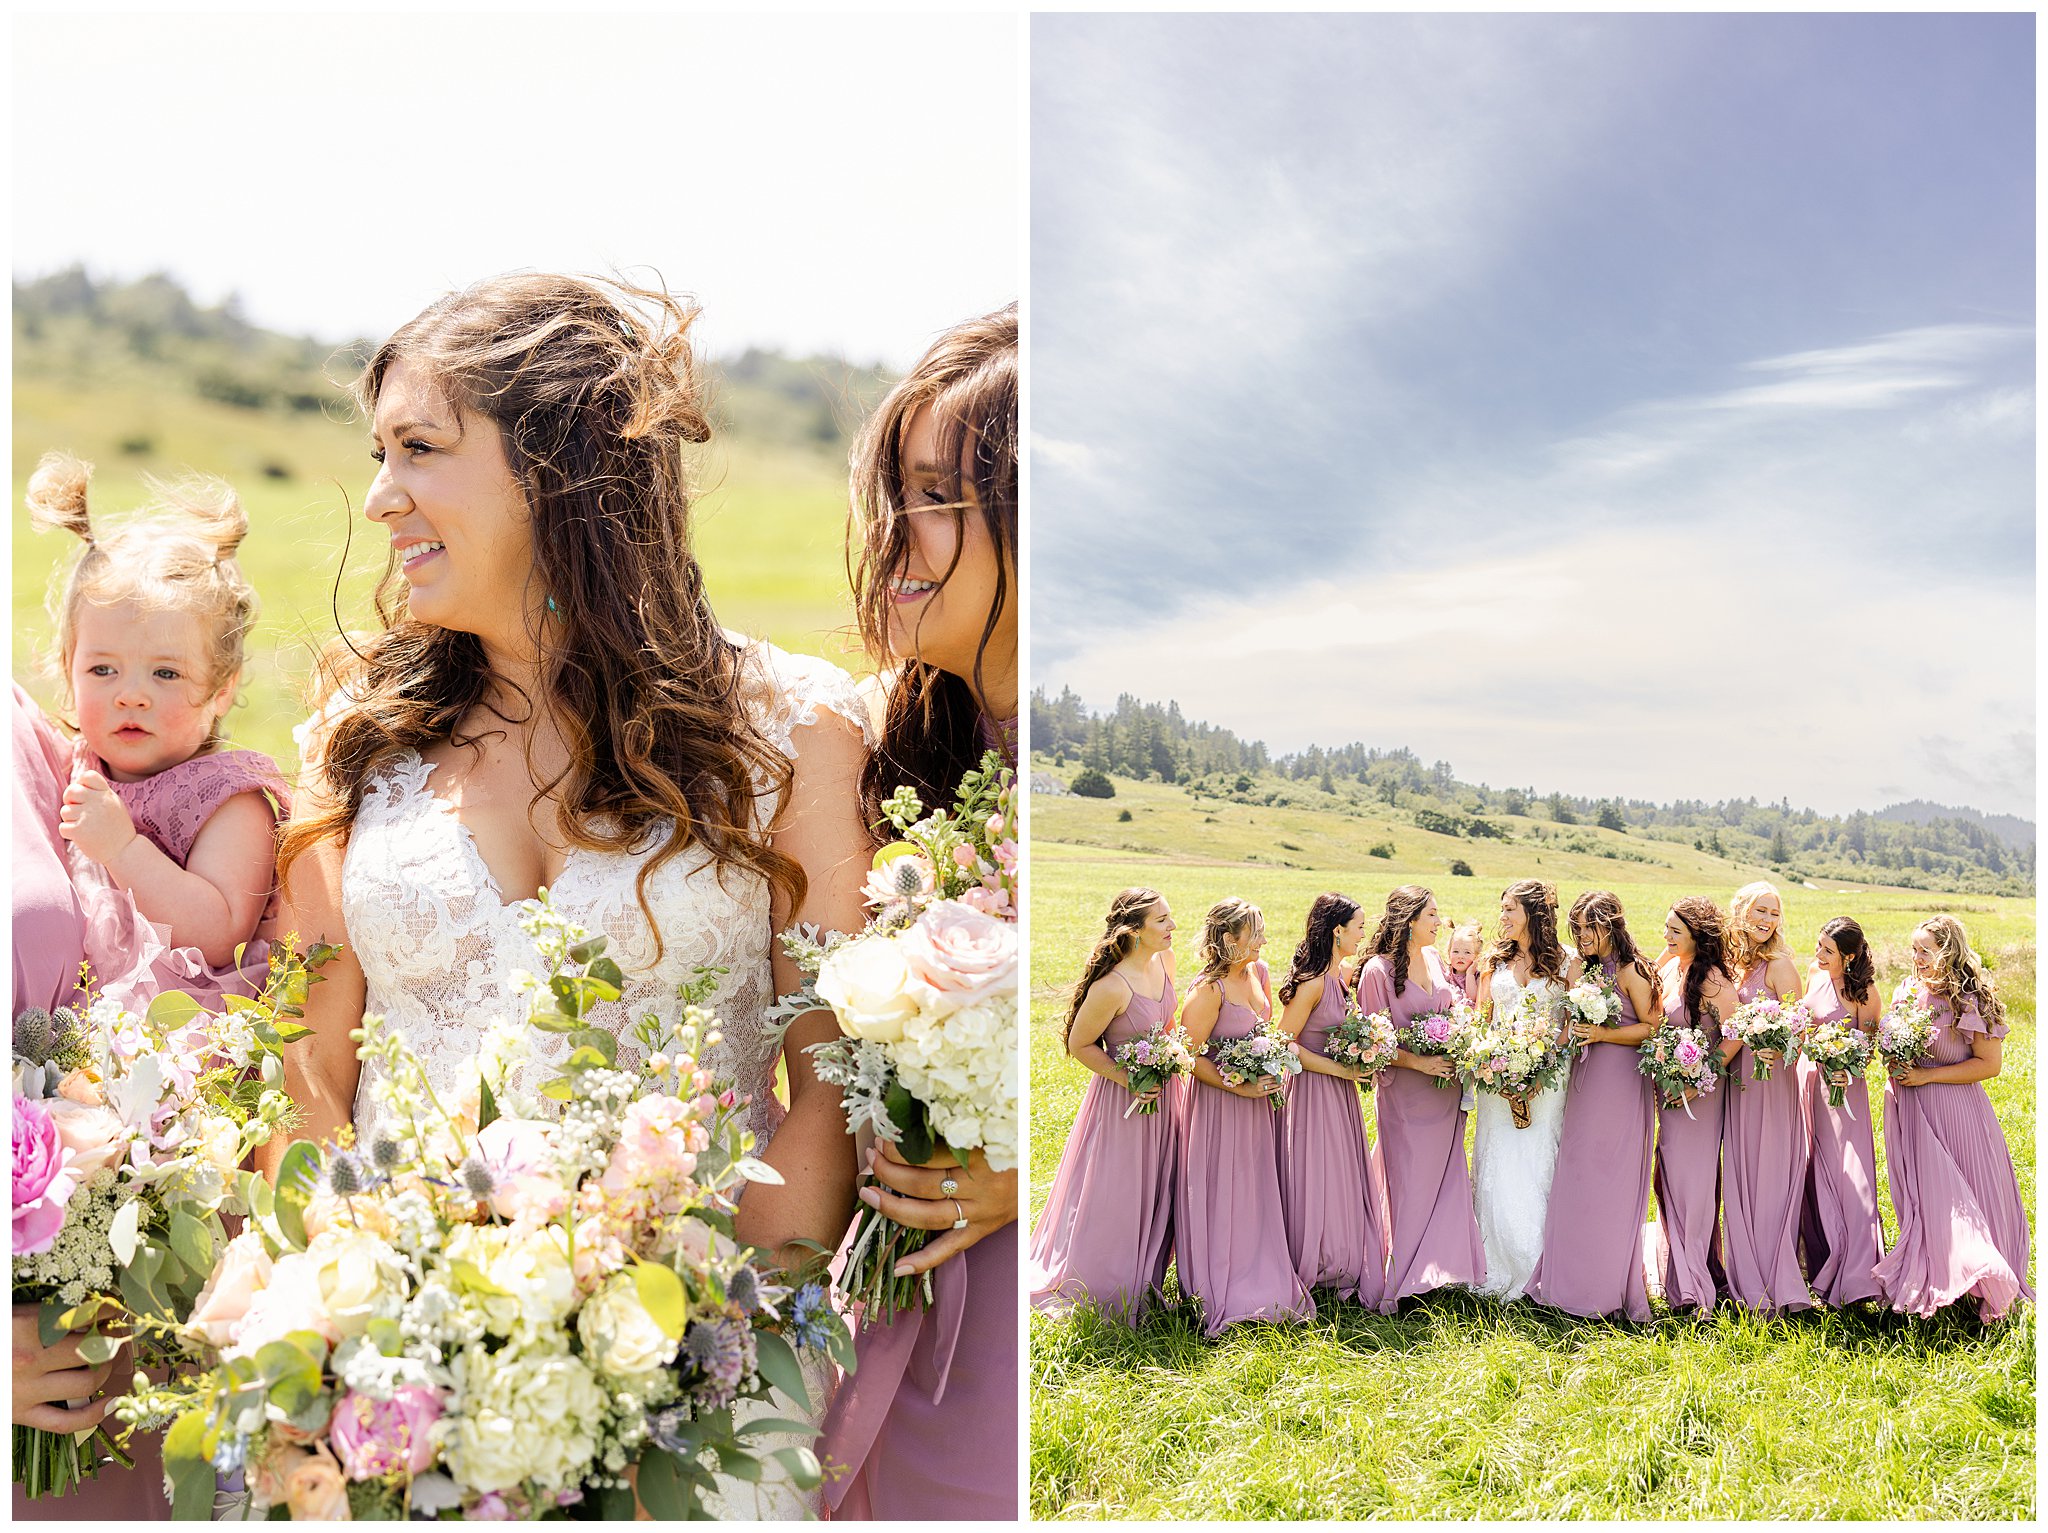 At the Bluff Wedding Ferndale CA West Coastline Barn Reception Mauve Bridesmaids Dresses Western Boots First Look,